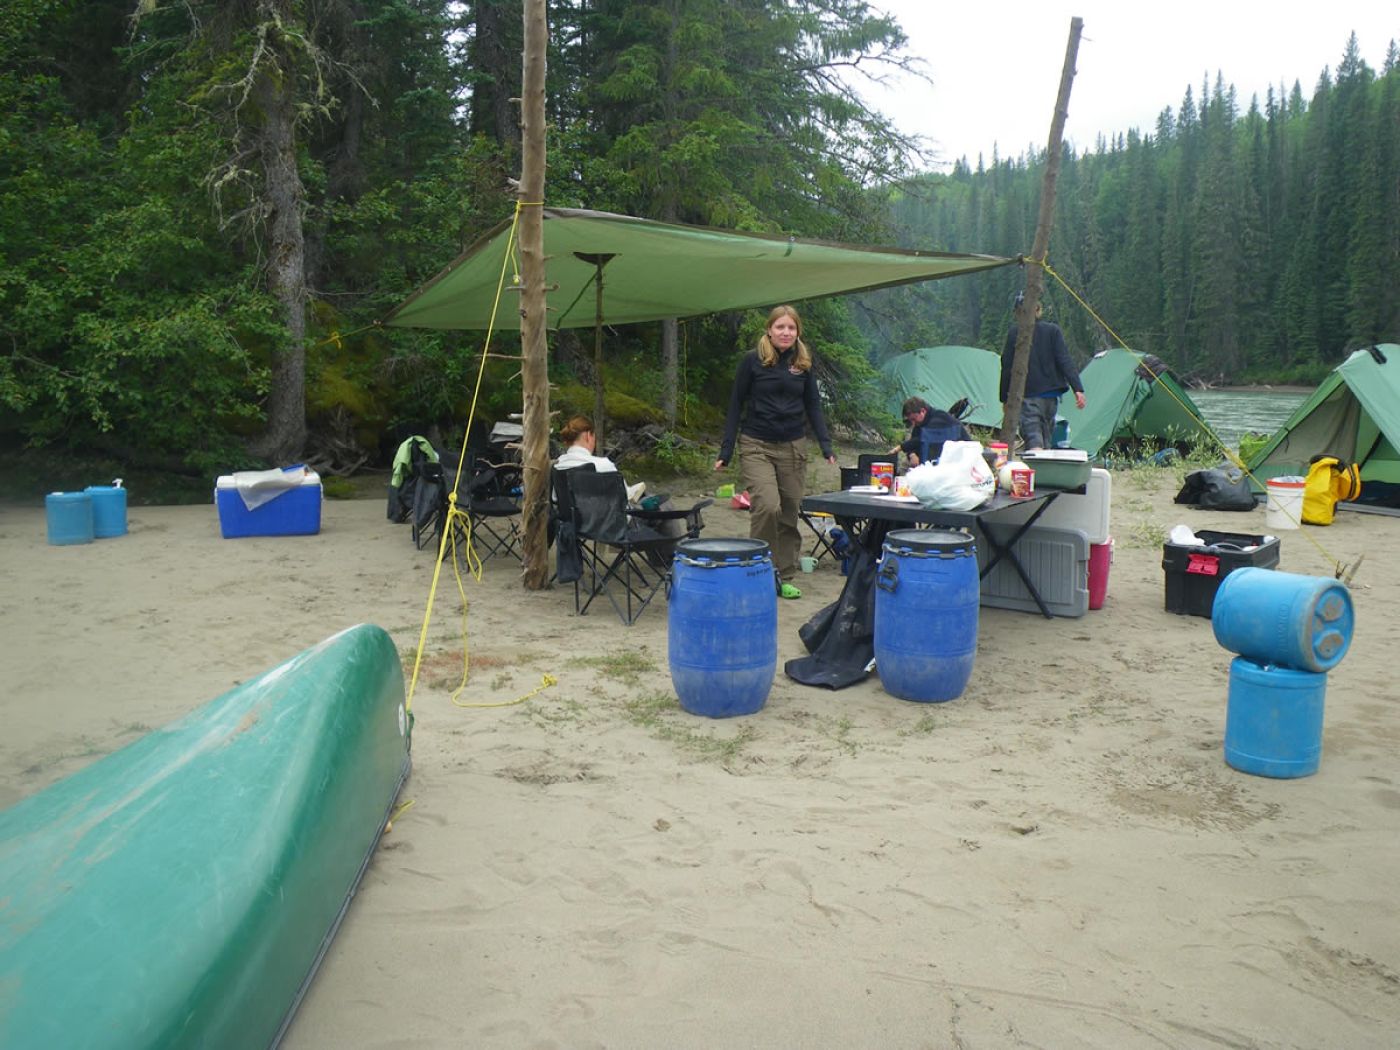 camping tour in rocky mountains of canada | campingtour in rocky mountains von kanada